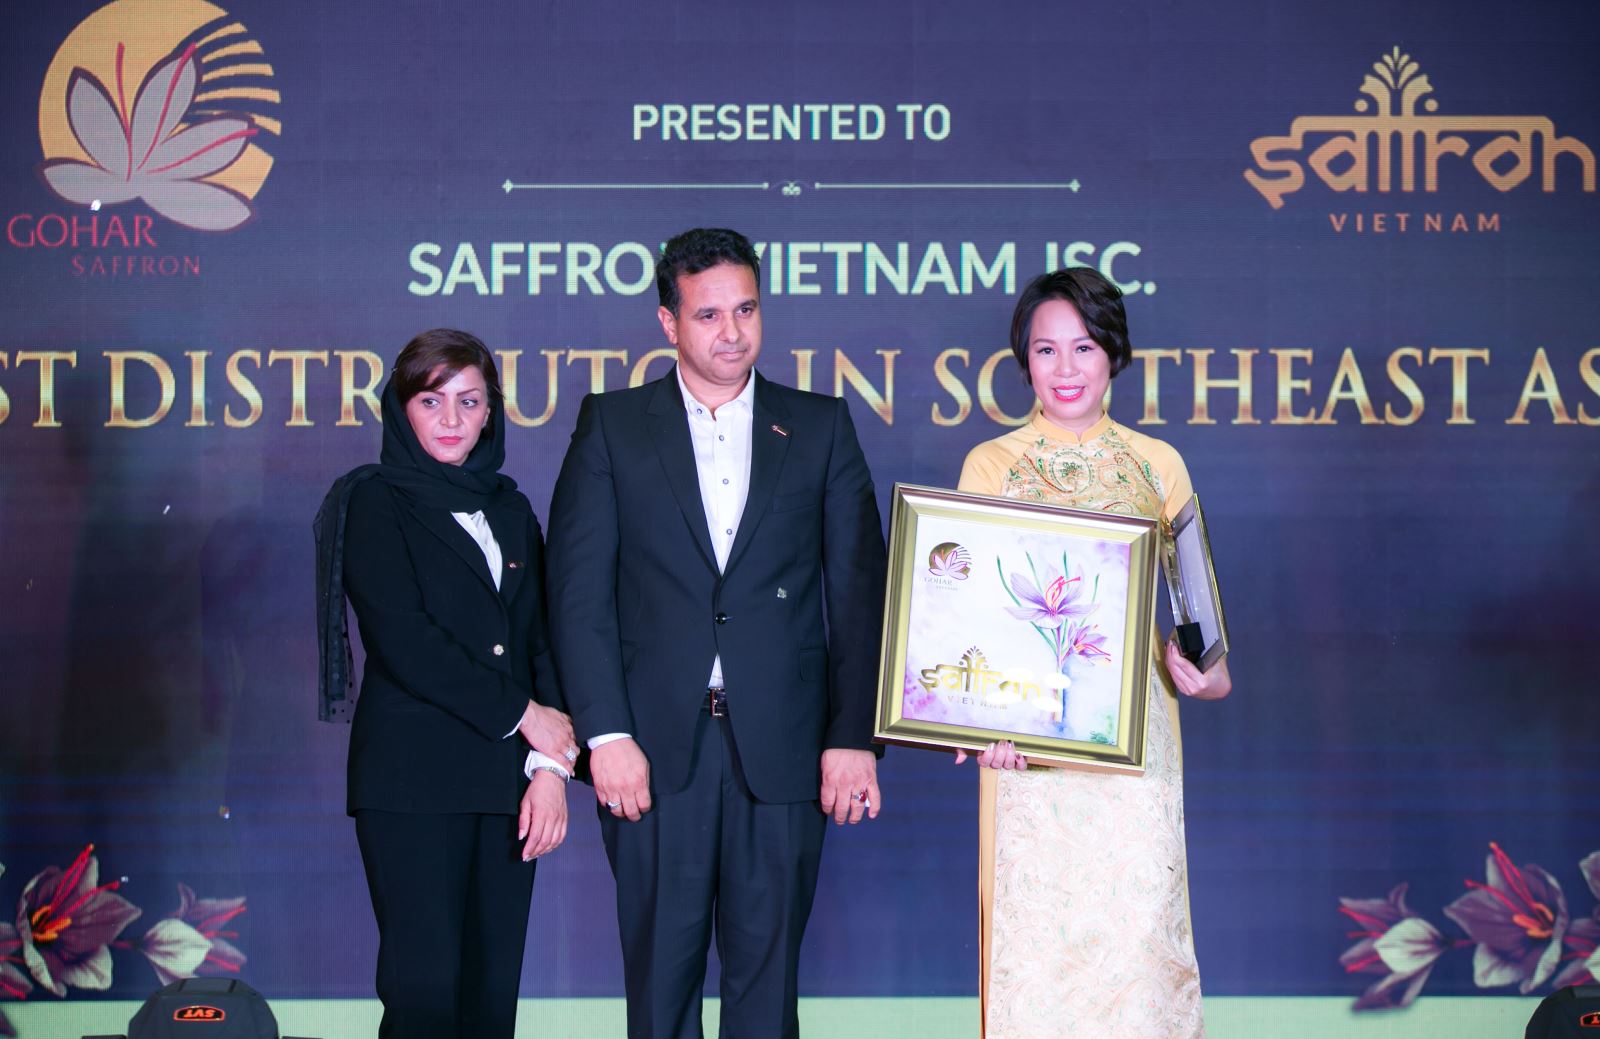 Participating in the Celebration of the 2-year Anniversary of the establishment of Saffron Vietnam Joint Stock Company (Our exclusive agent in Vietnam)